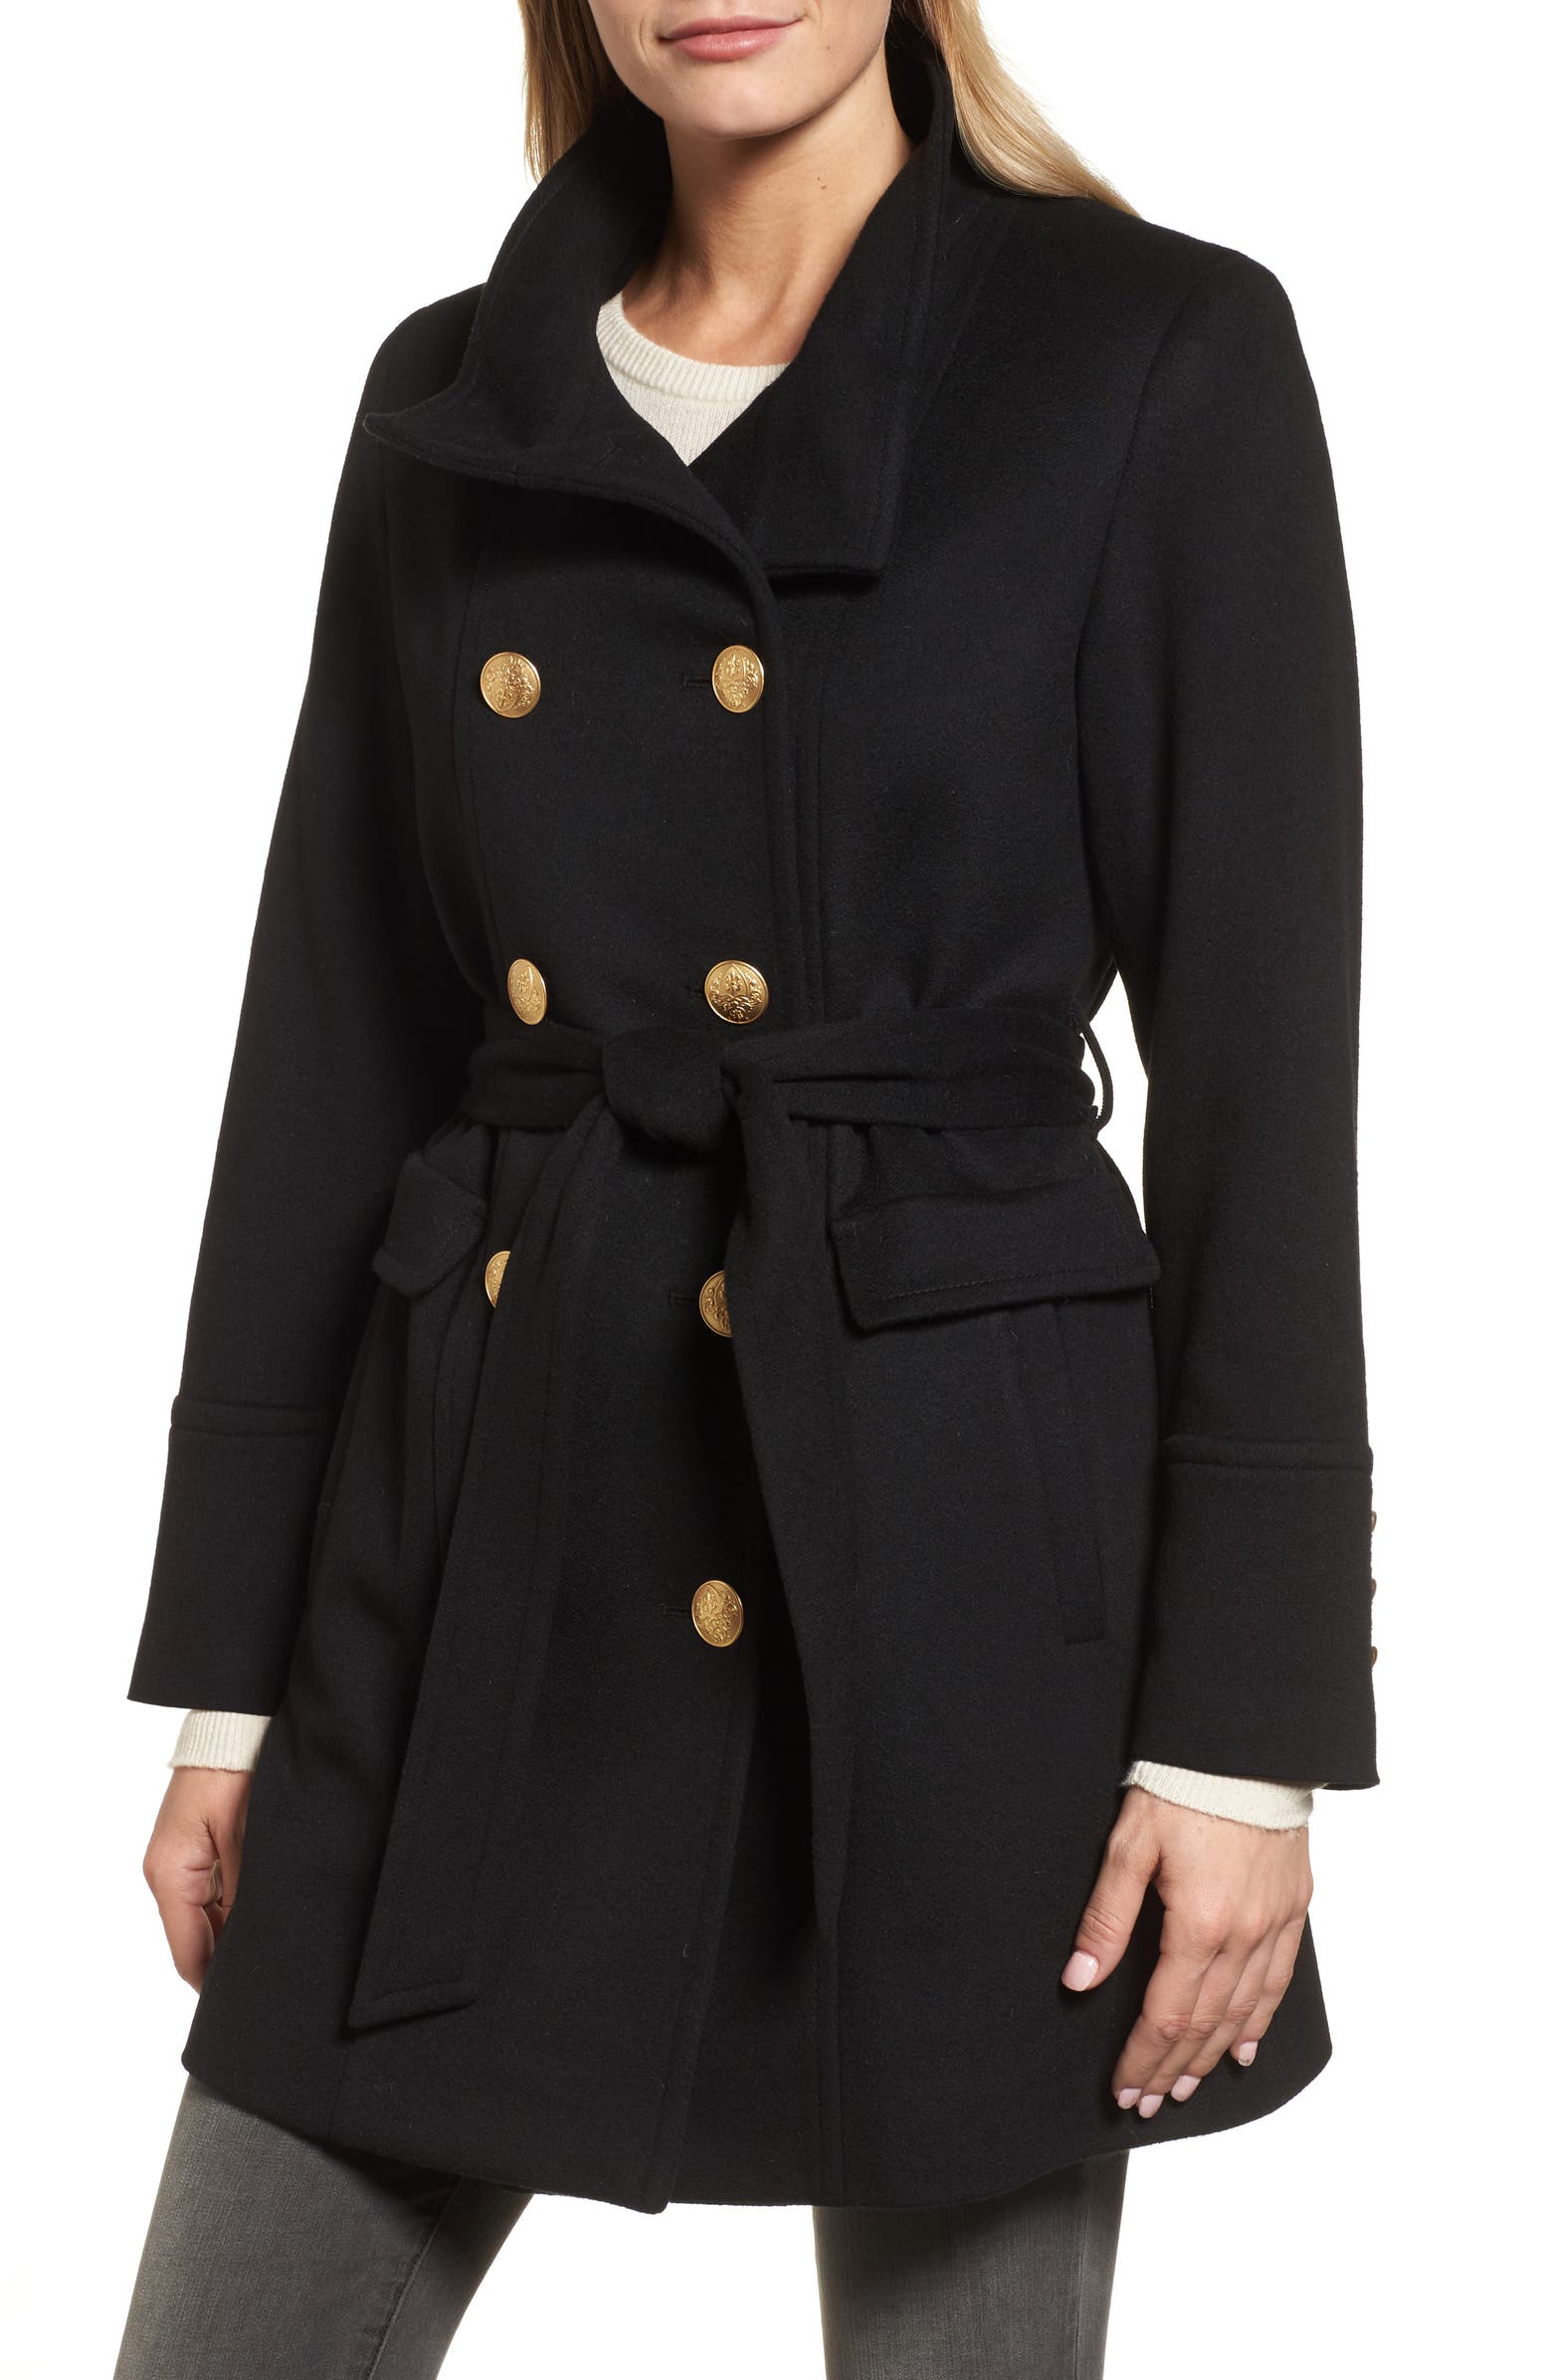 Sofia Cashmere Wool & Cashmere Blend Military Coat | Nordstrom